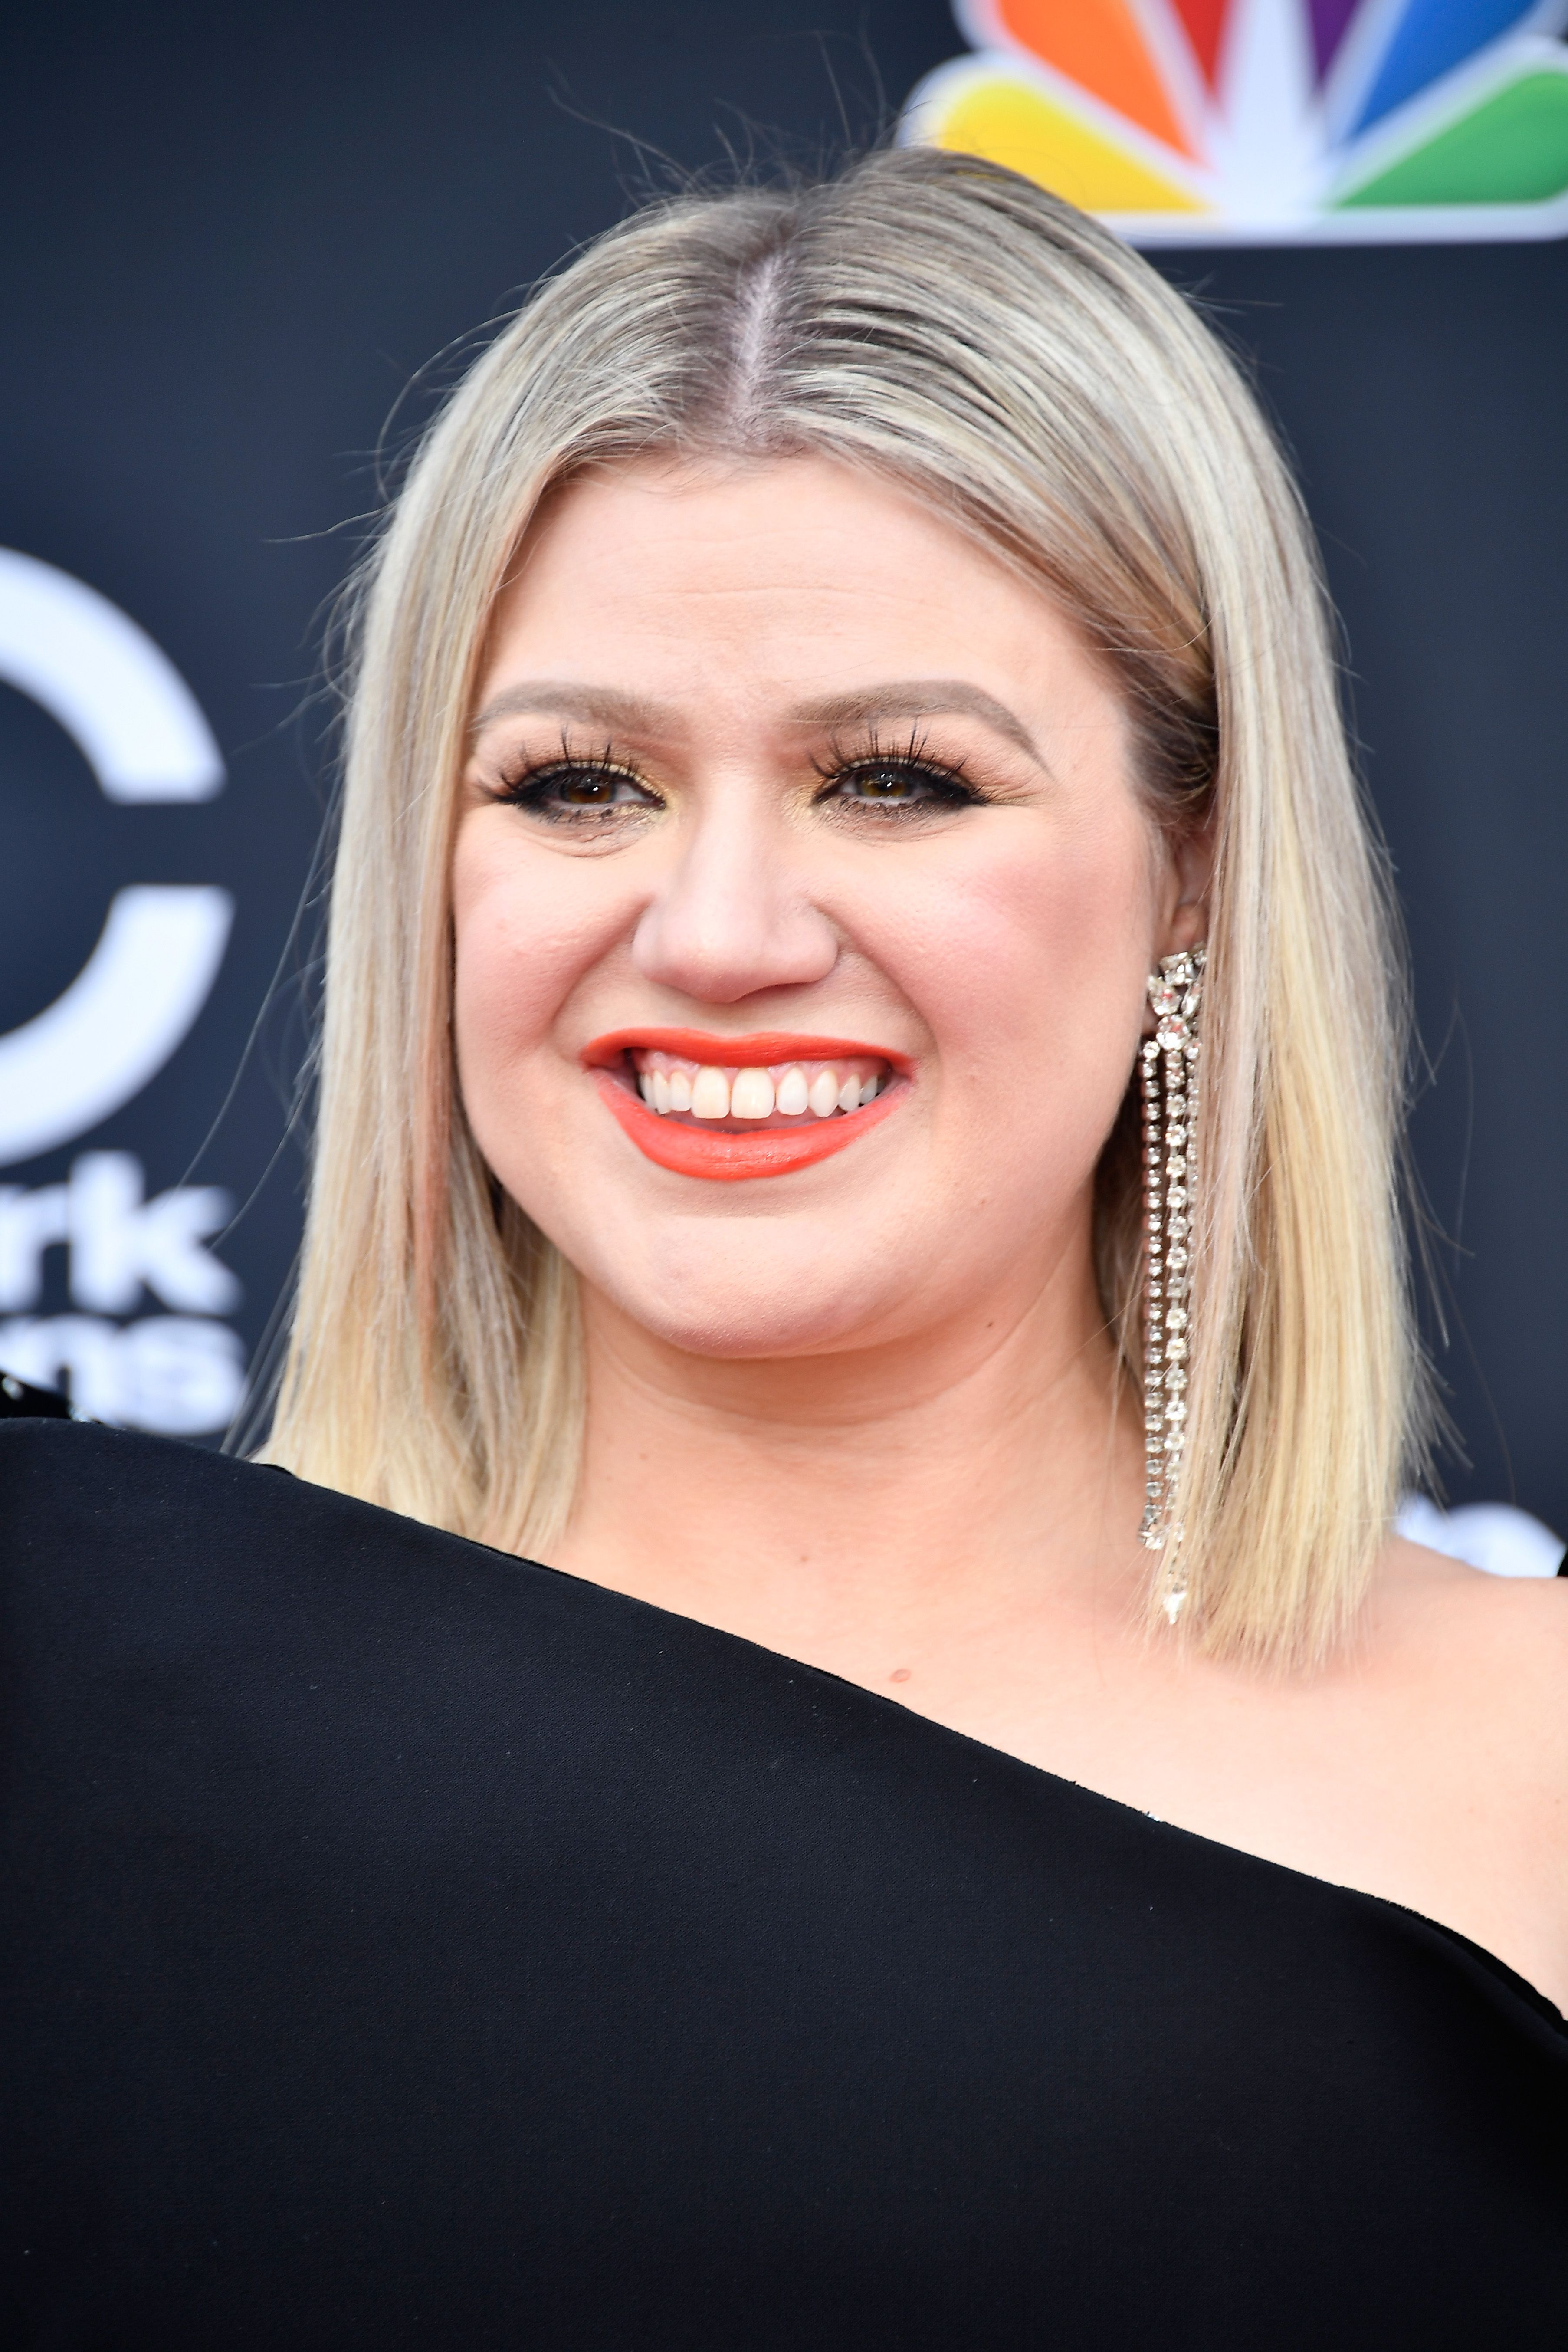 Kelly Clarkson at the 2018 Billboard Music Awards at MGM Grand Garden Arena on May 20, 2018. | Photo: Getty Images